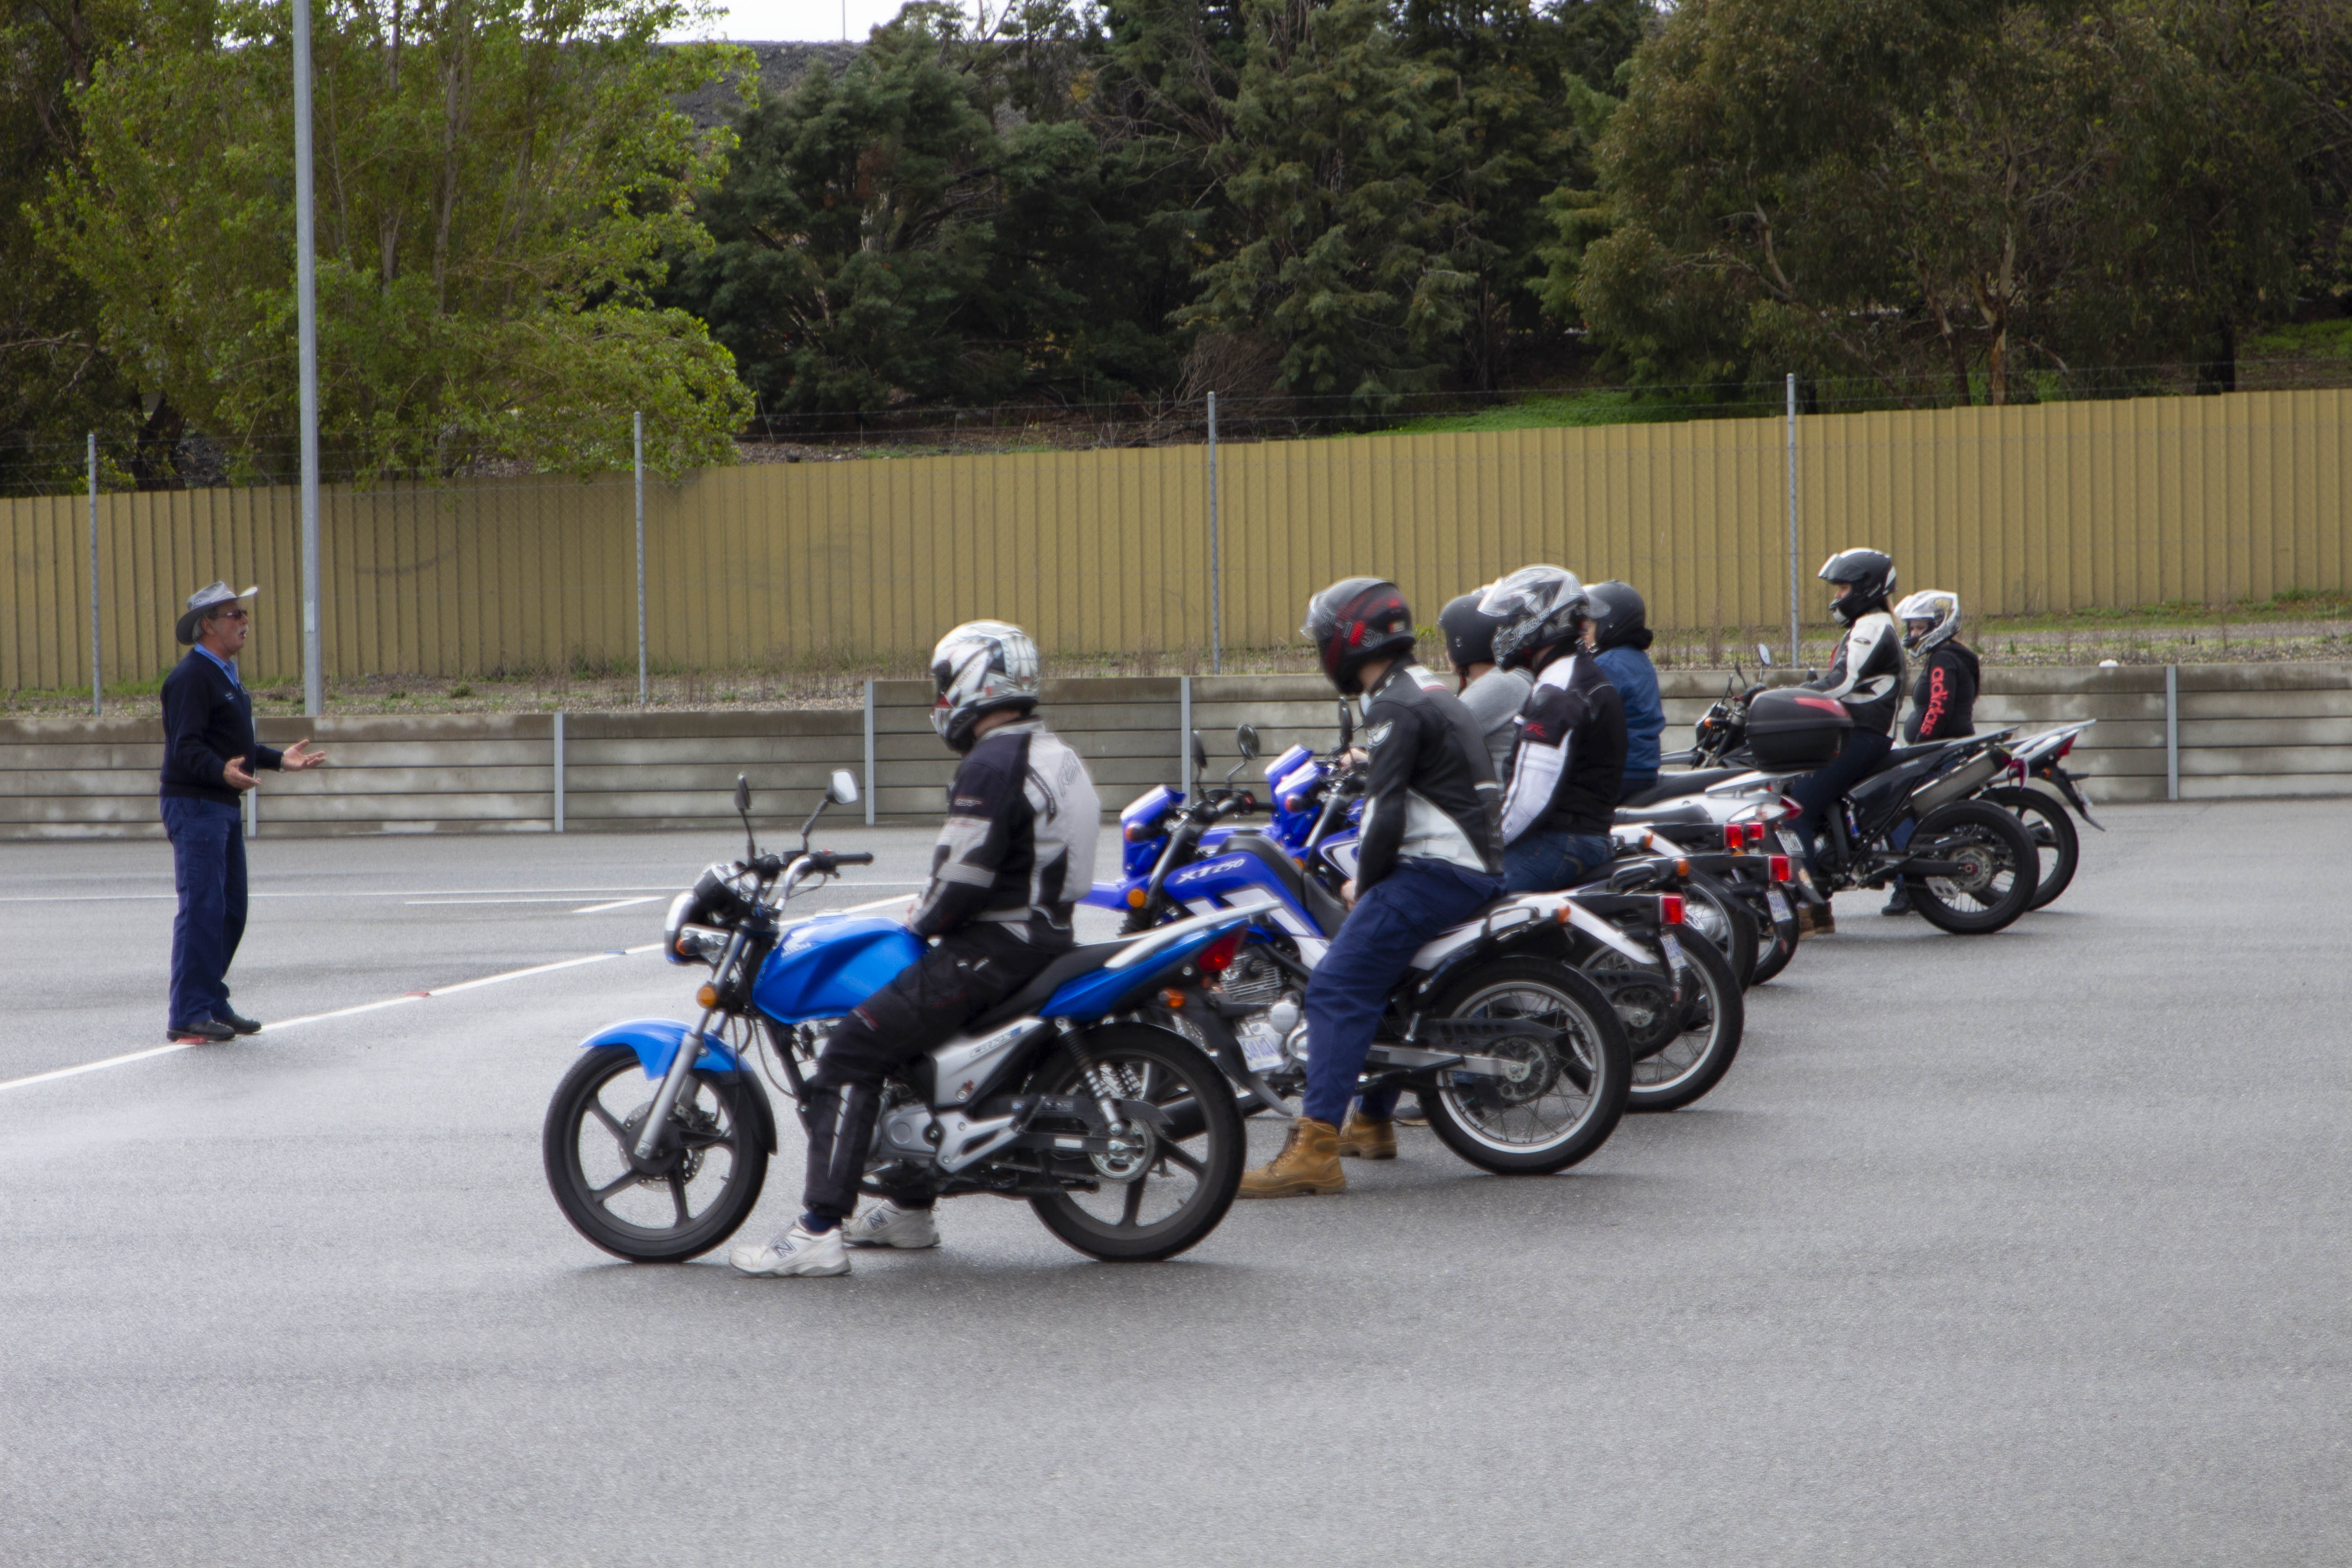 A group of motorcyclists, seated on their motorbikes, under instruction